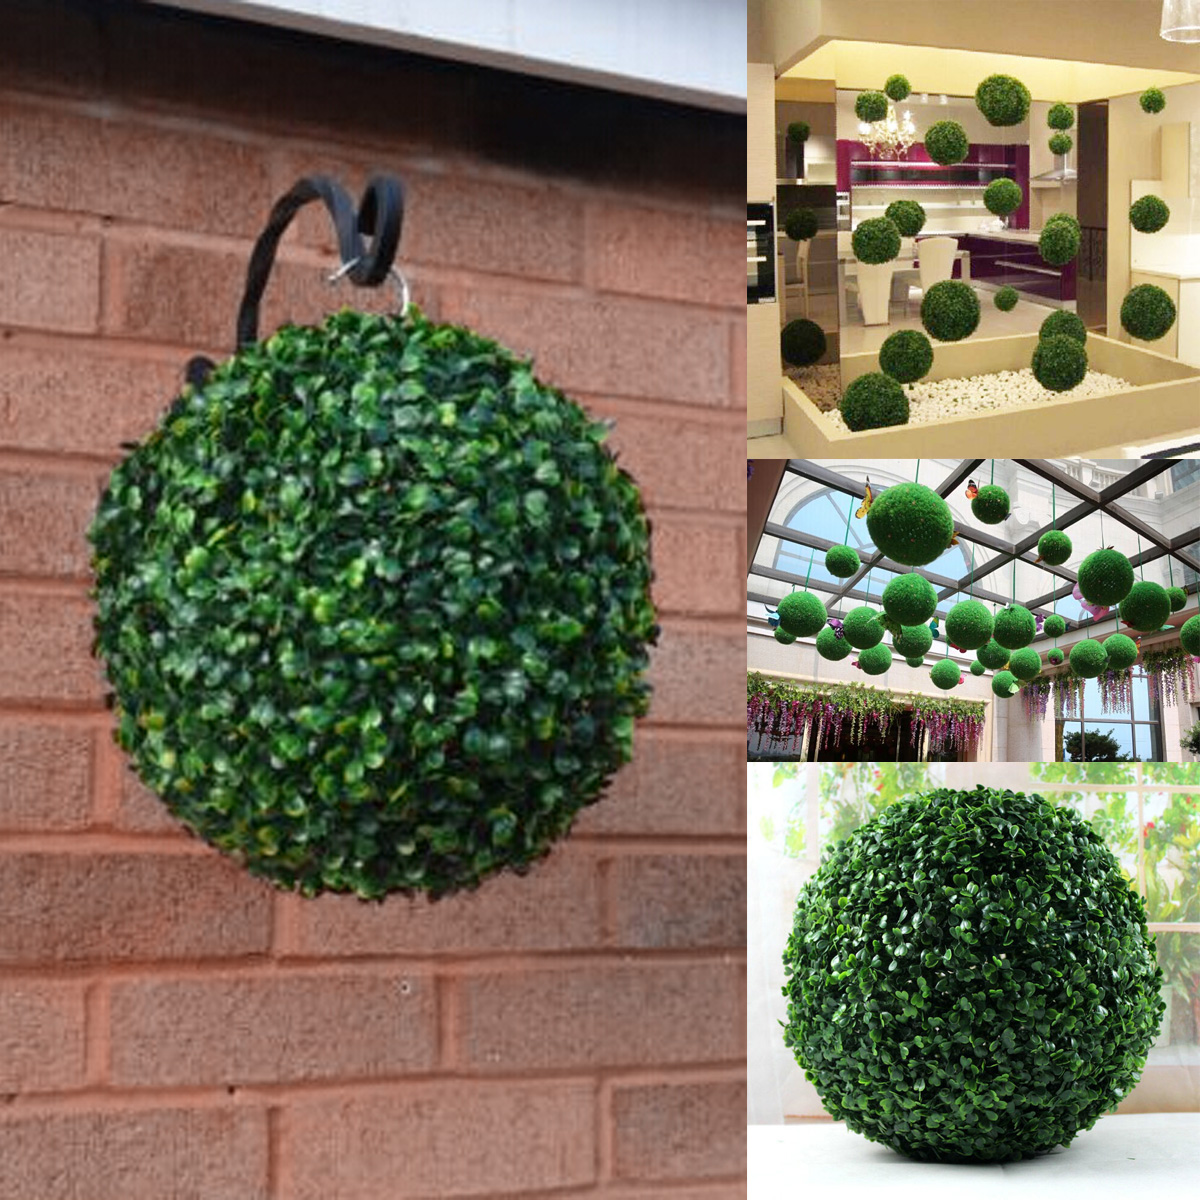 35cm-Plastic-Artificial-Topiary-Grass-Ball-Leaf-Effect-Ball-Wedding-Gardening-Hanging-Decoration-1036994-4